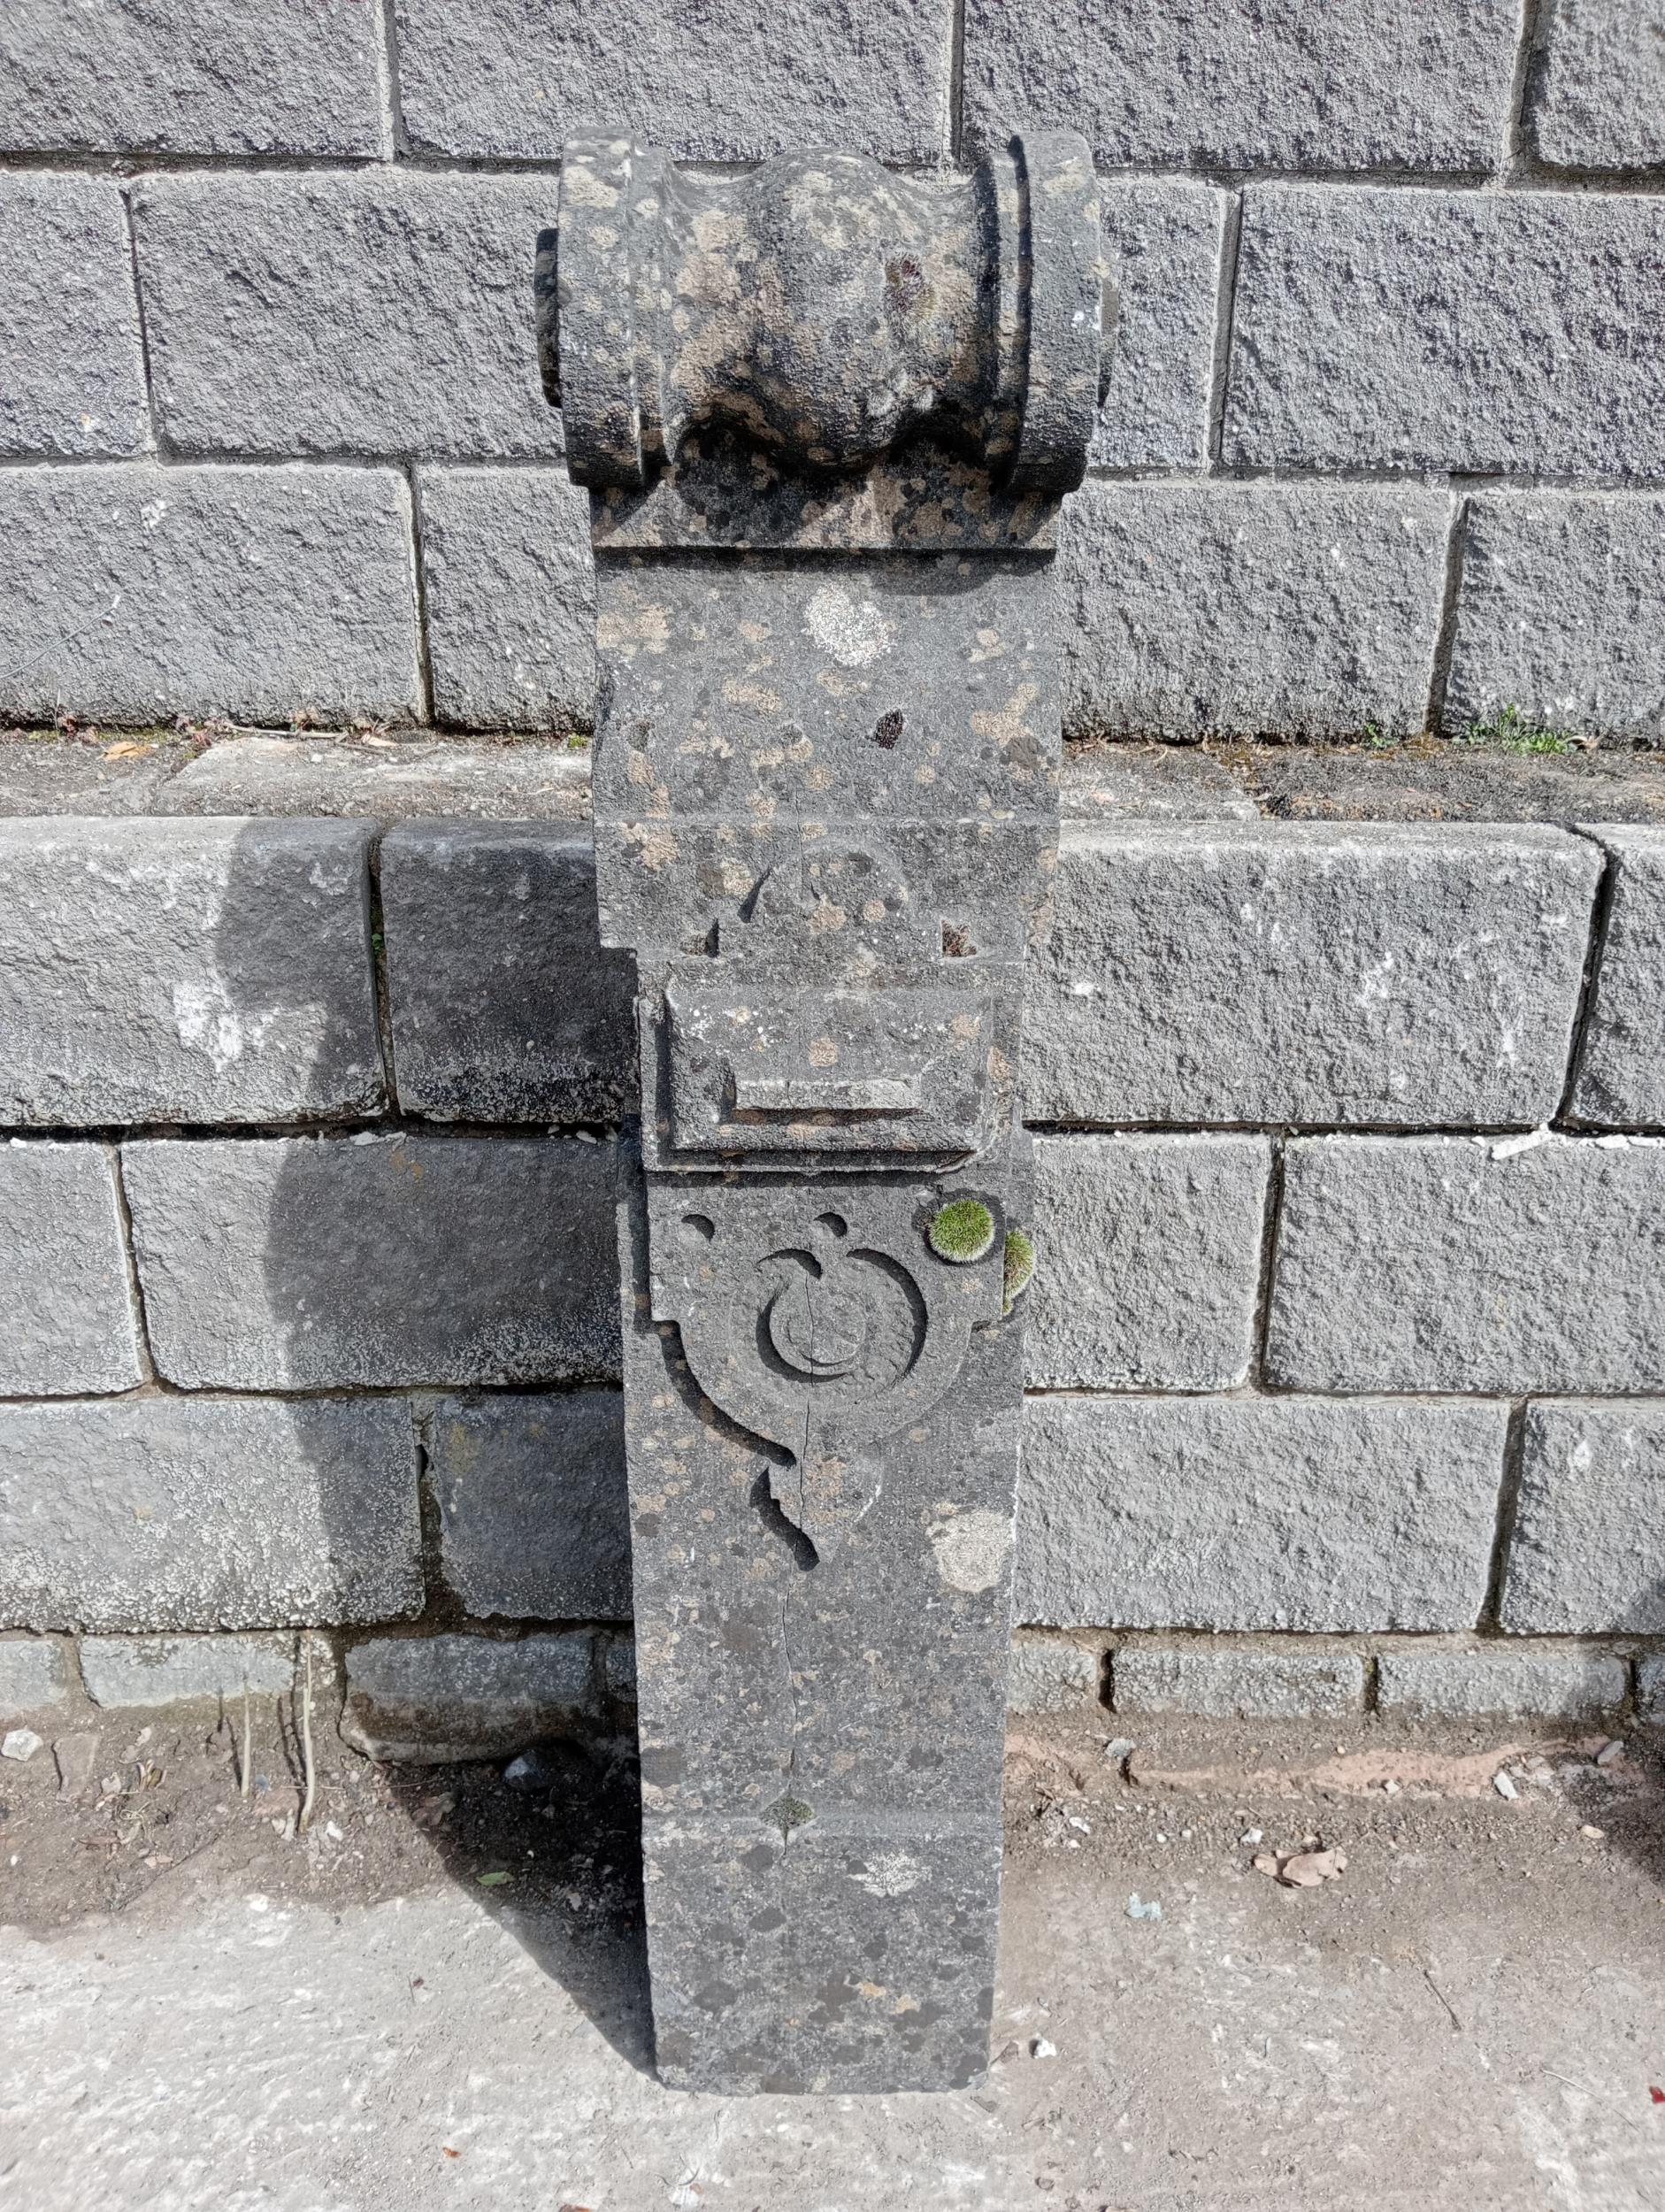 Stone gate post {H 125cm x W 23cm x D 19cm }. (NOT AVAILABLE TO VIEW IN PERSON)